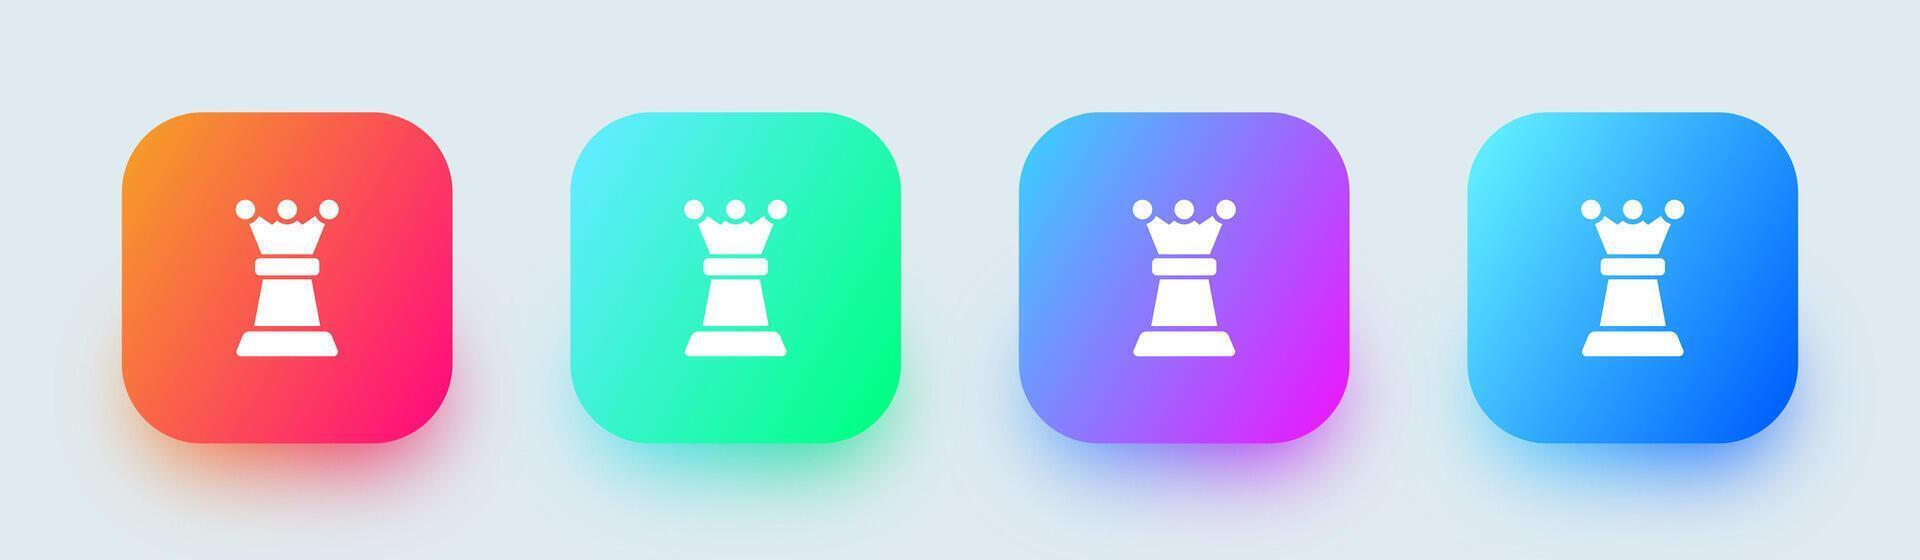 Chess solid icon in square gradient colors. Board game signs illustration. vector